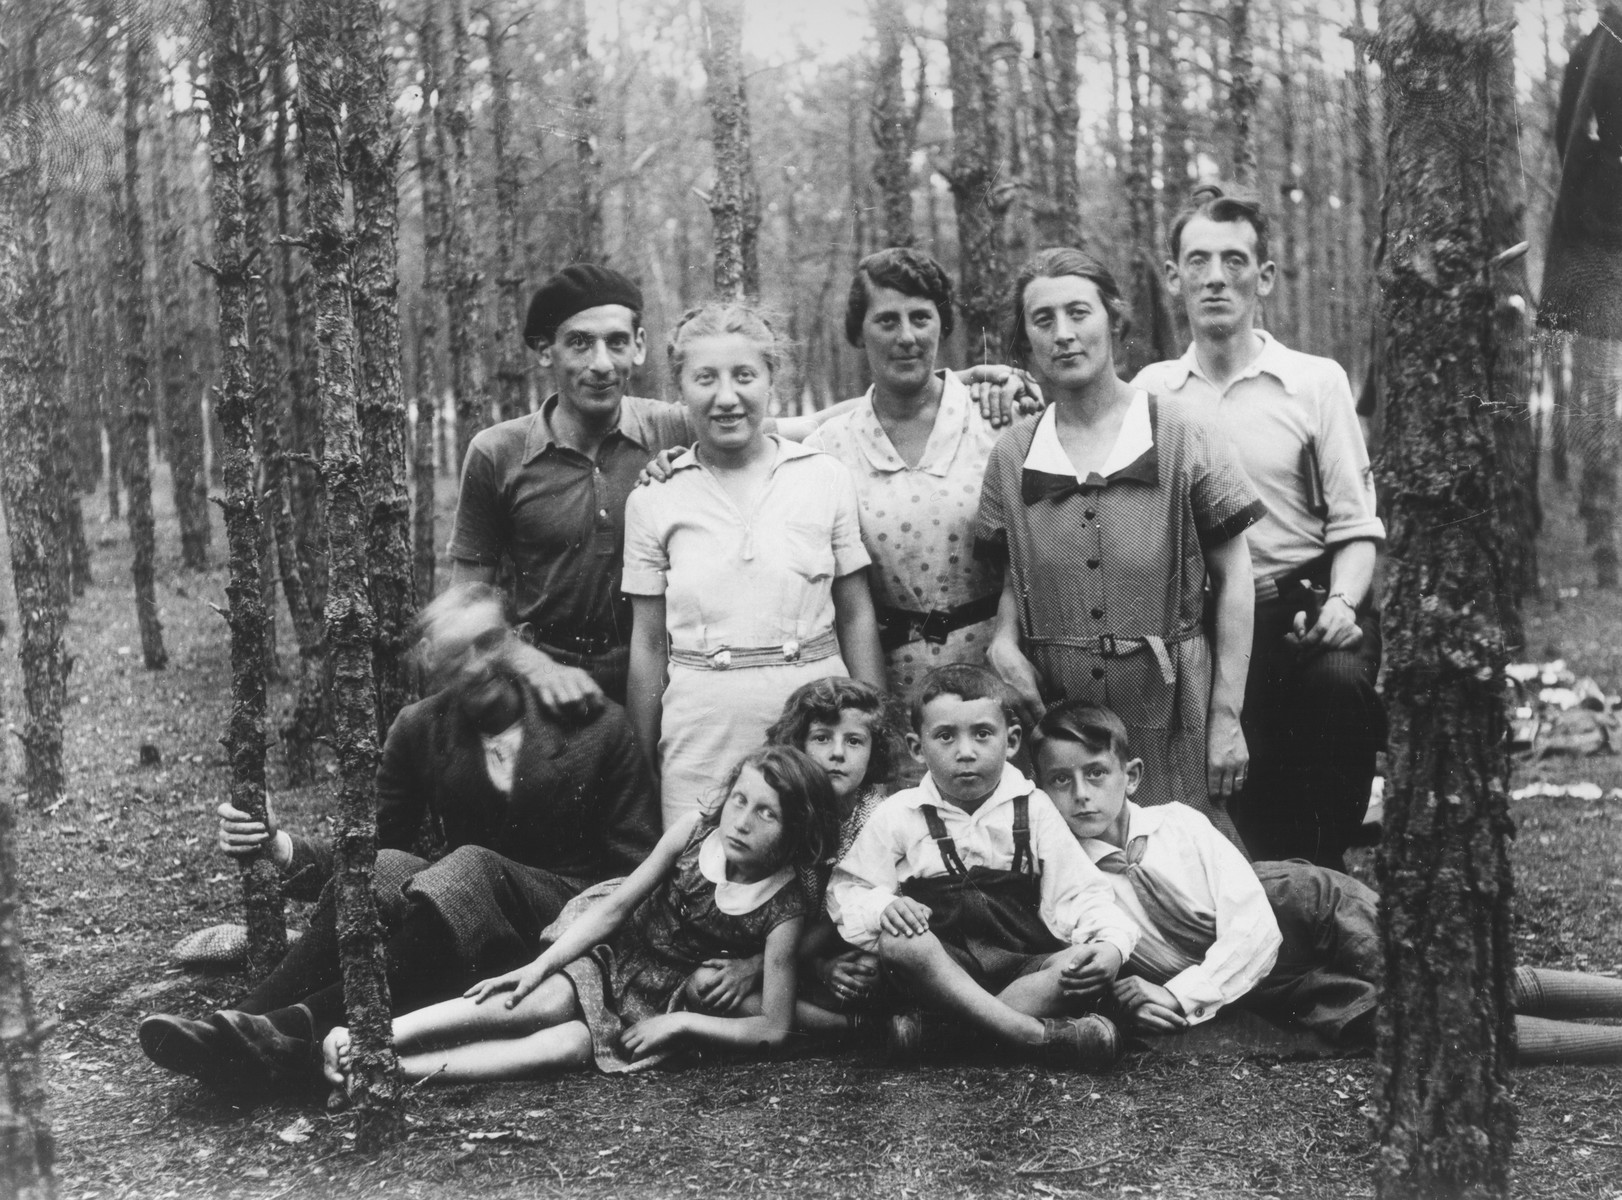 Group portrait of members of an extended Jewish family on an outing to the Wolboz Forest near Piotrkow Trybunalski, Poland.

Pictured are members of the Wolrajch family.  The photograph was taken during the visit of a cousin, Helen Tolep, from the U.S.  Pictured in the back row from left to right are: Joel Wolrajch, Helen Tolep, Rachel Wolrajch (wife of Hersh Lieb), Chia Sura Wolrajch and Hersh Lieb Wolrajch.  Sitting in front are: Shaya Wolrajch (blurred), Rachel Fish, Ginka Wolrajch, wolf, and Chiemic Wolrajch.